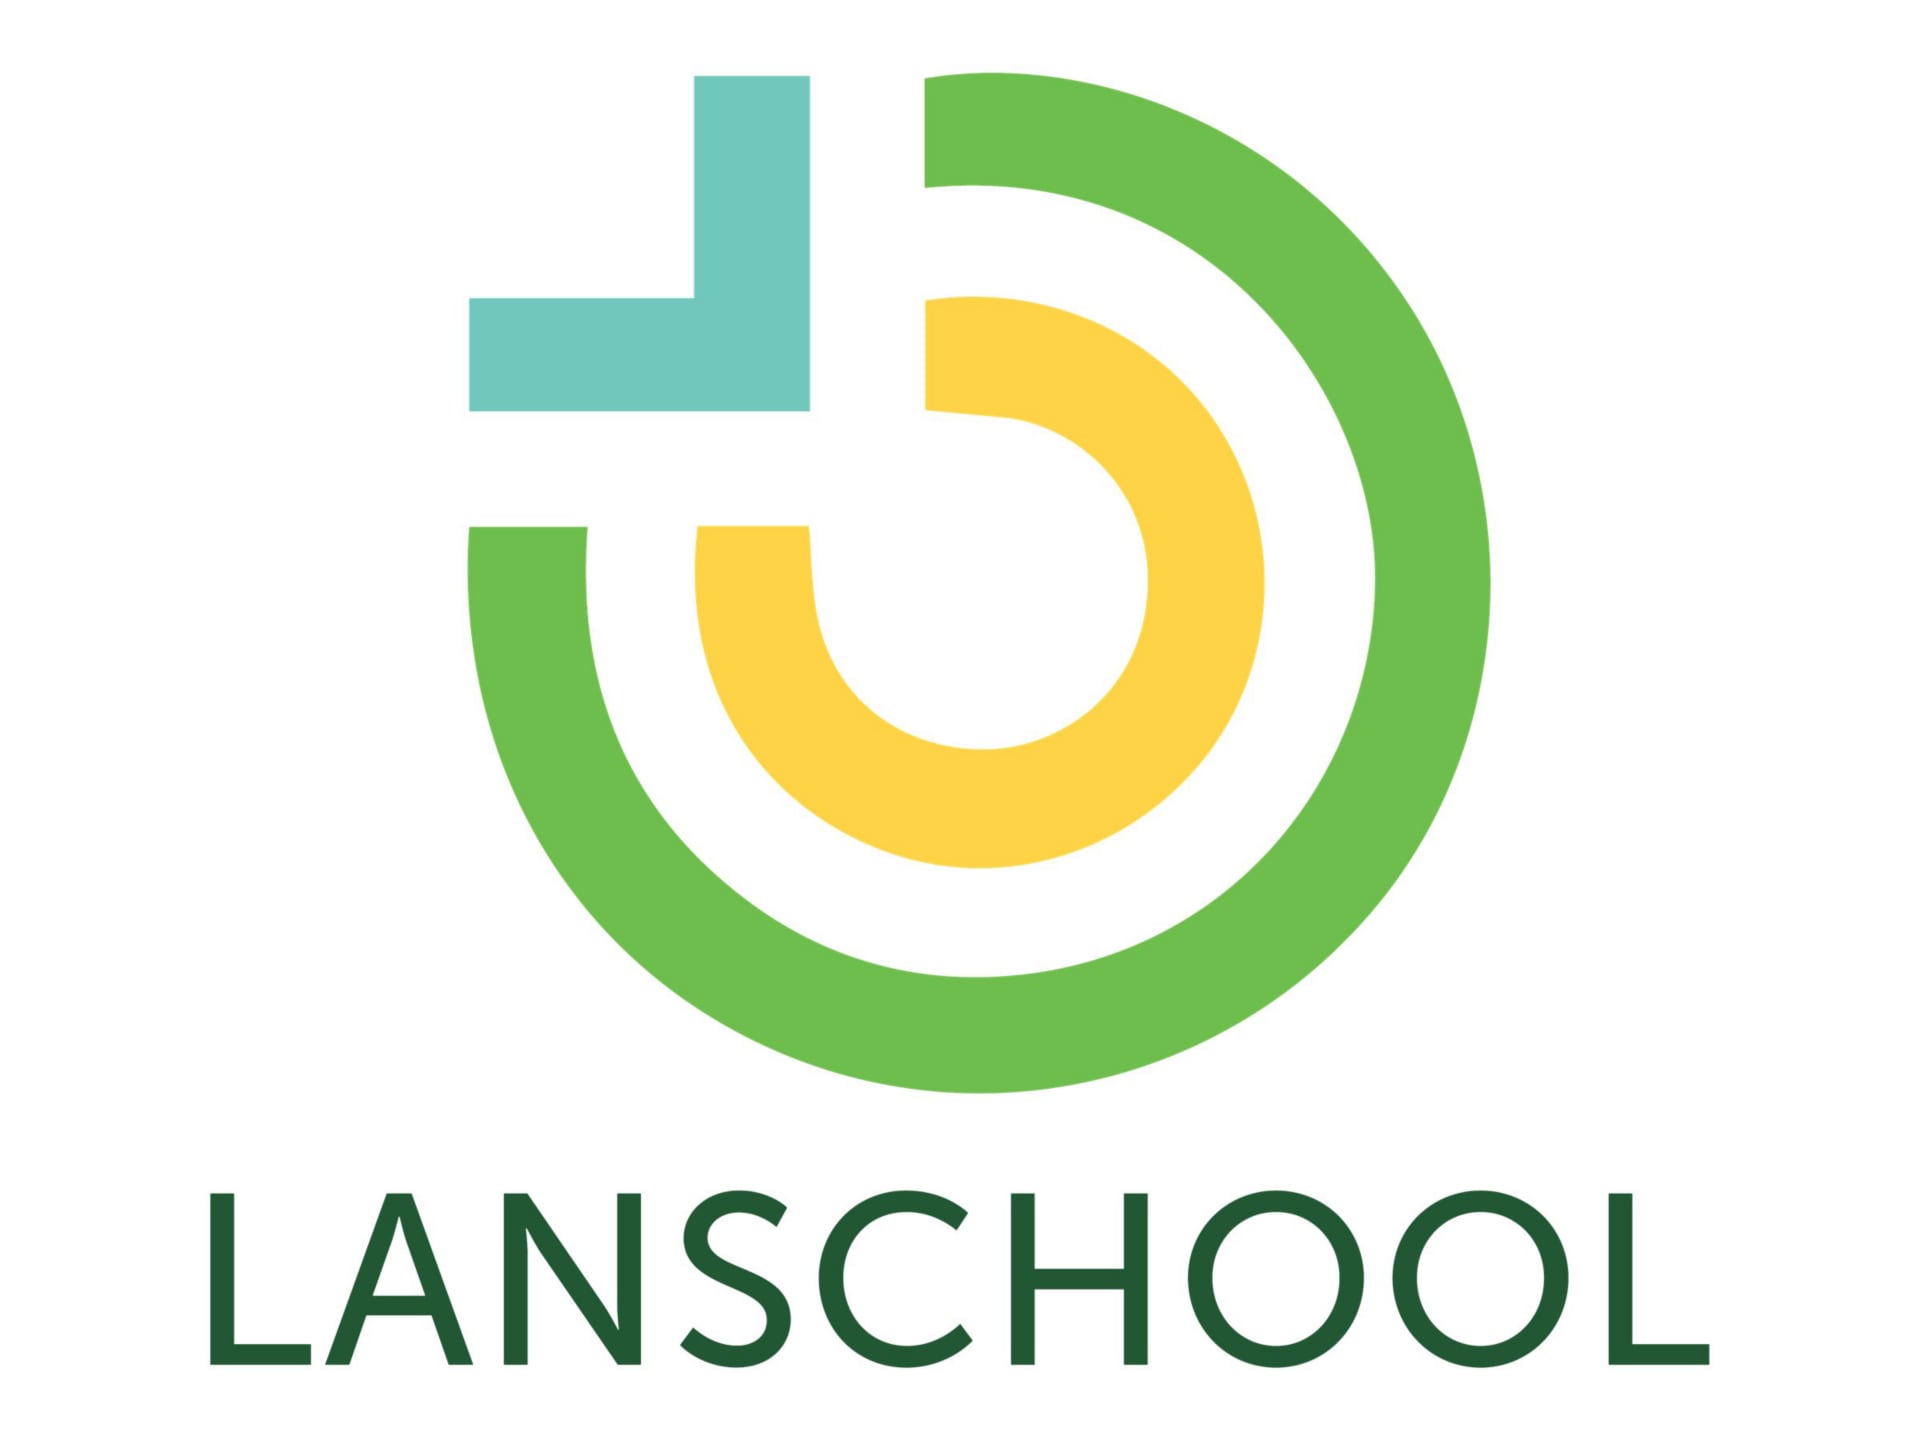 LanSchool - subscription license + 1 Year Technical Support - 1 license